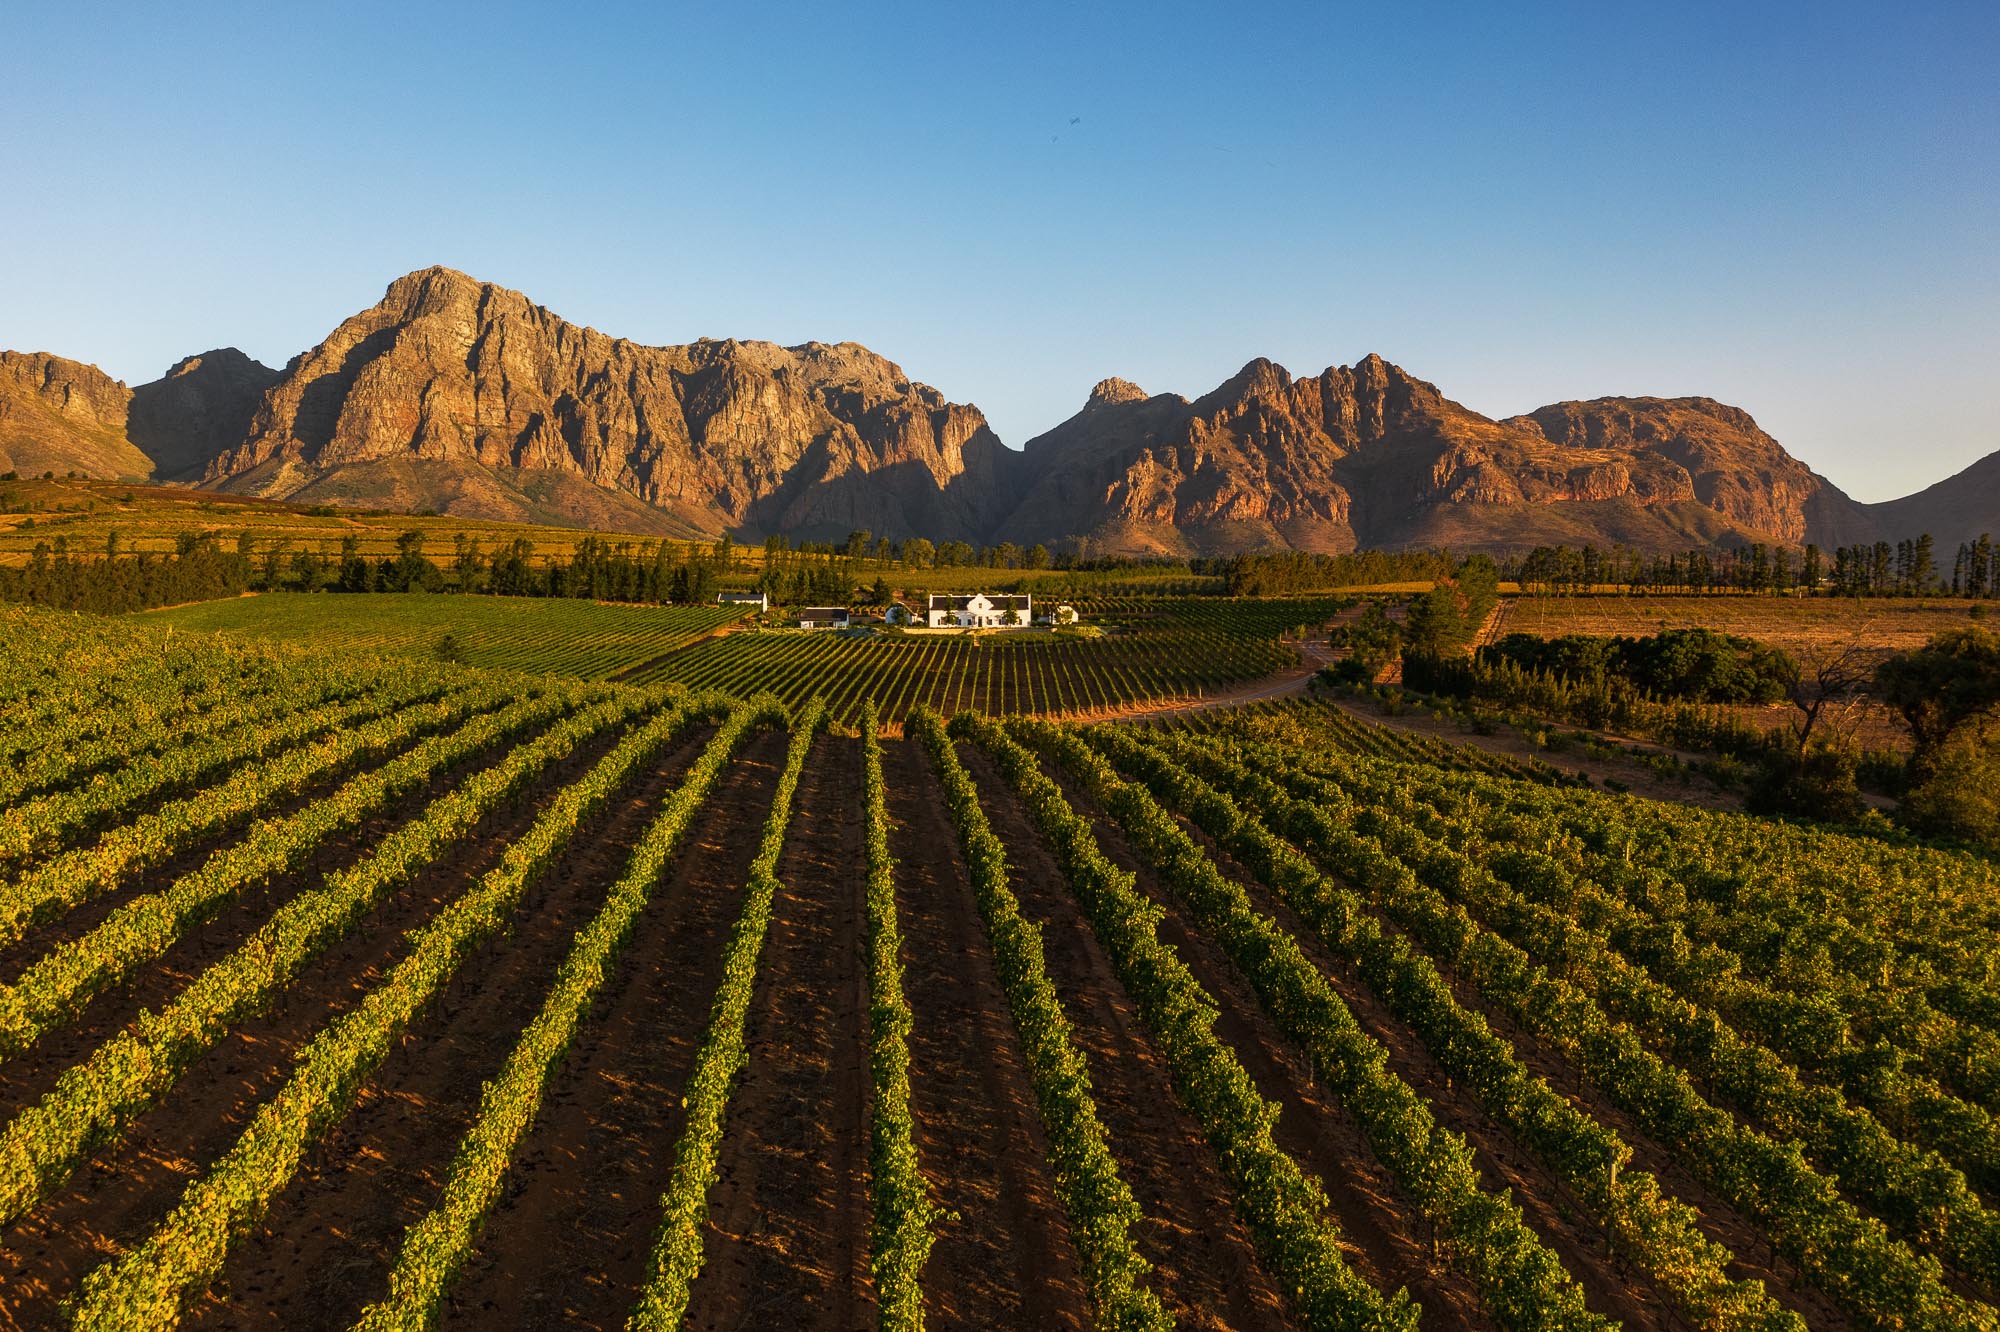 Brookdale Estate just after sunset with Paarl mountain views and vineyards